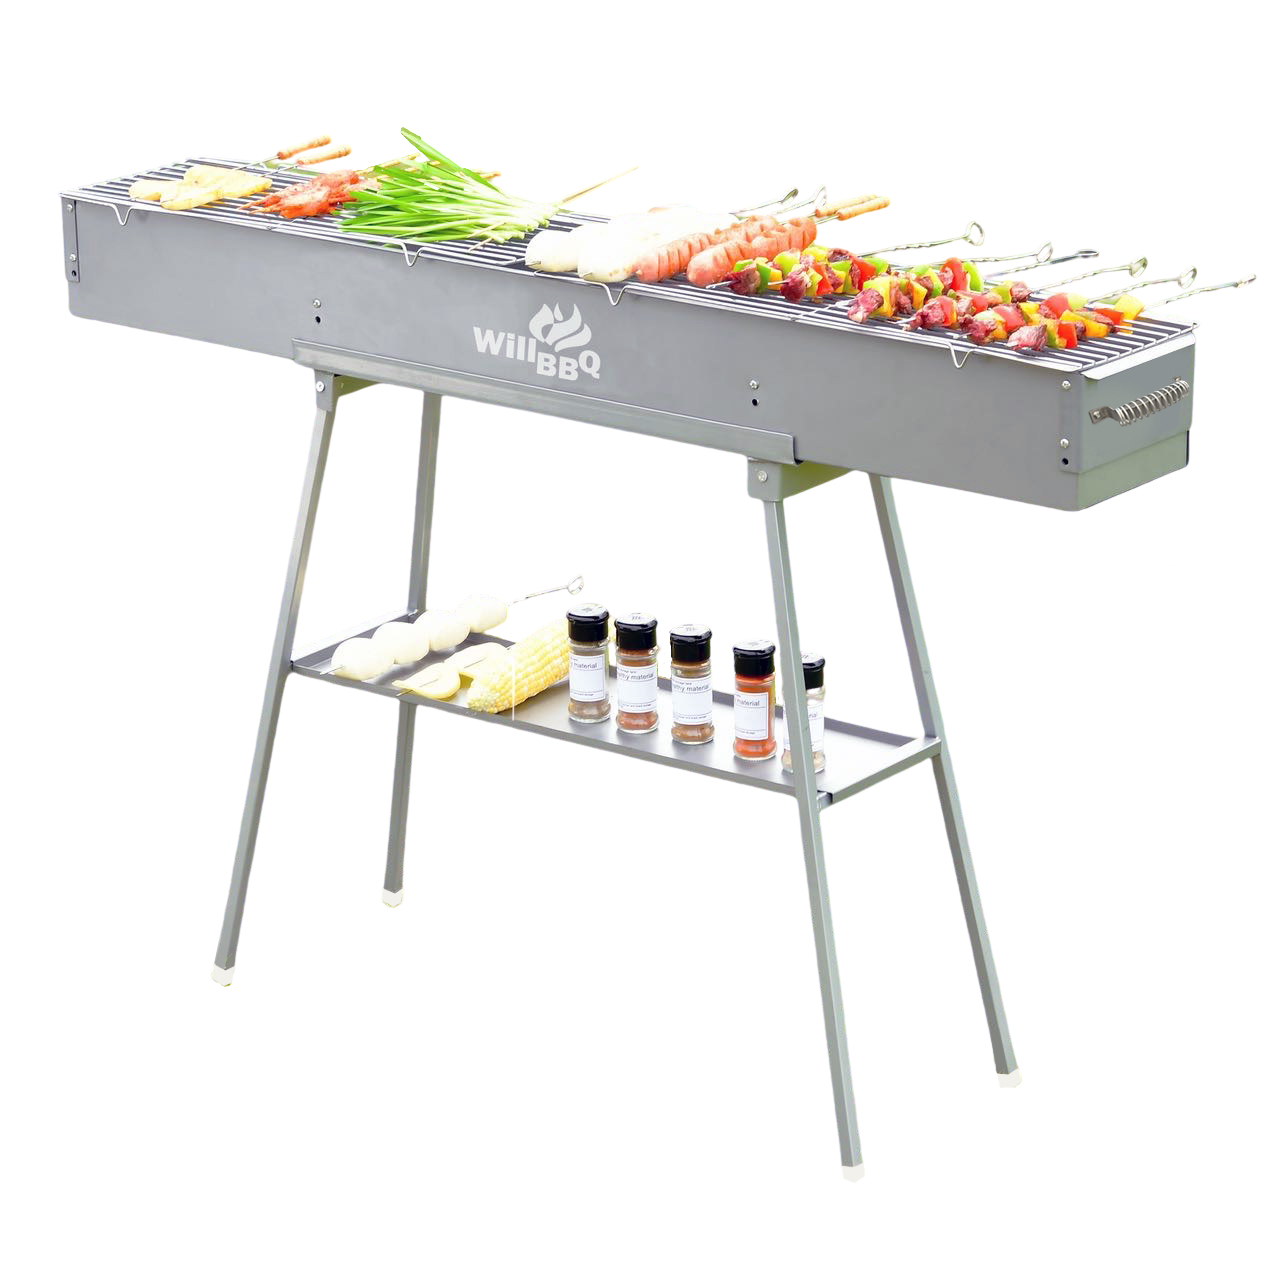 120cm x 18cm Commercial Quality Portable Charcoal Hibachi BBQ Camping Barbecue Grill